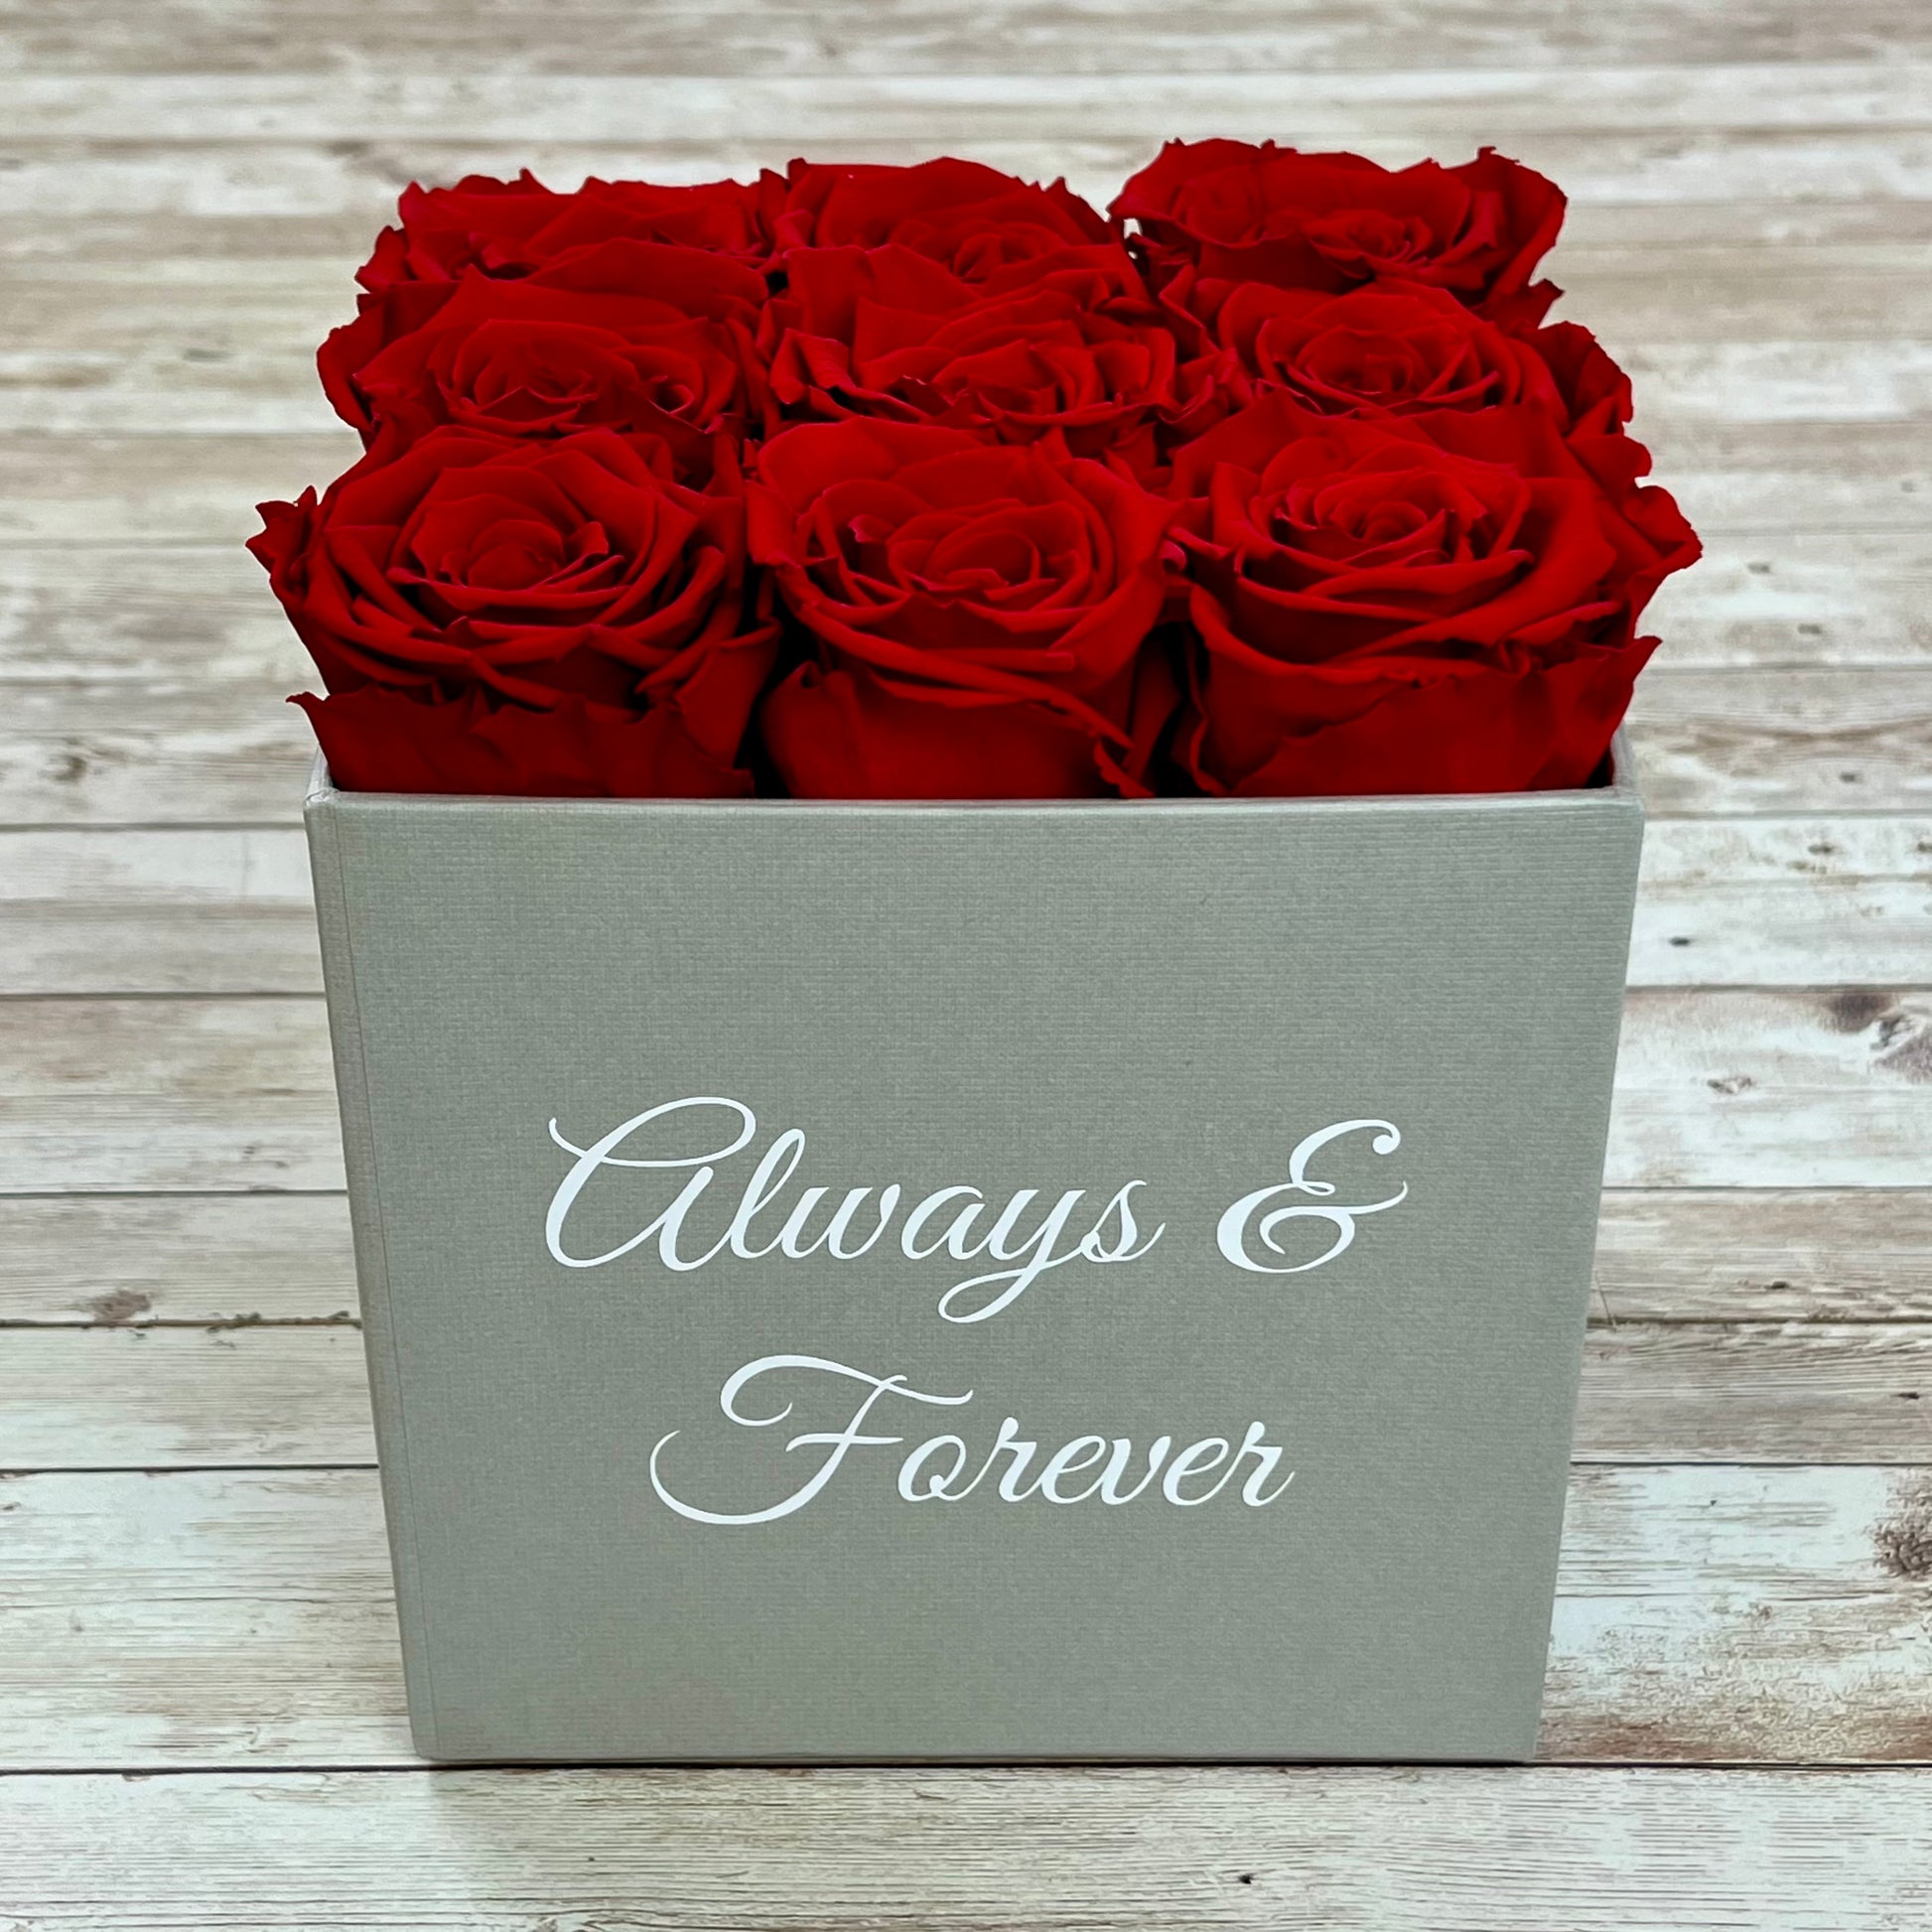 Grey Square Infinity Rose Box - Red Infinity Roses - One Year Roses - Rose Colours divider-Ruby Red